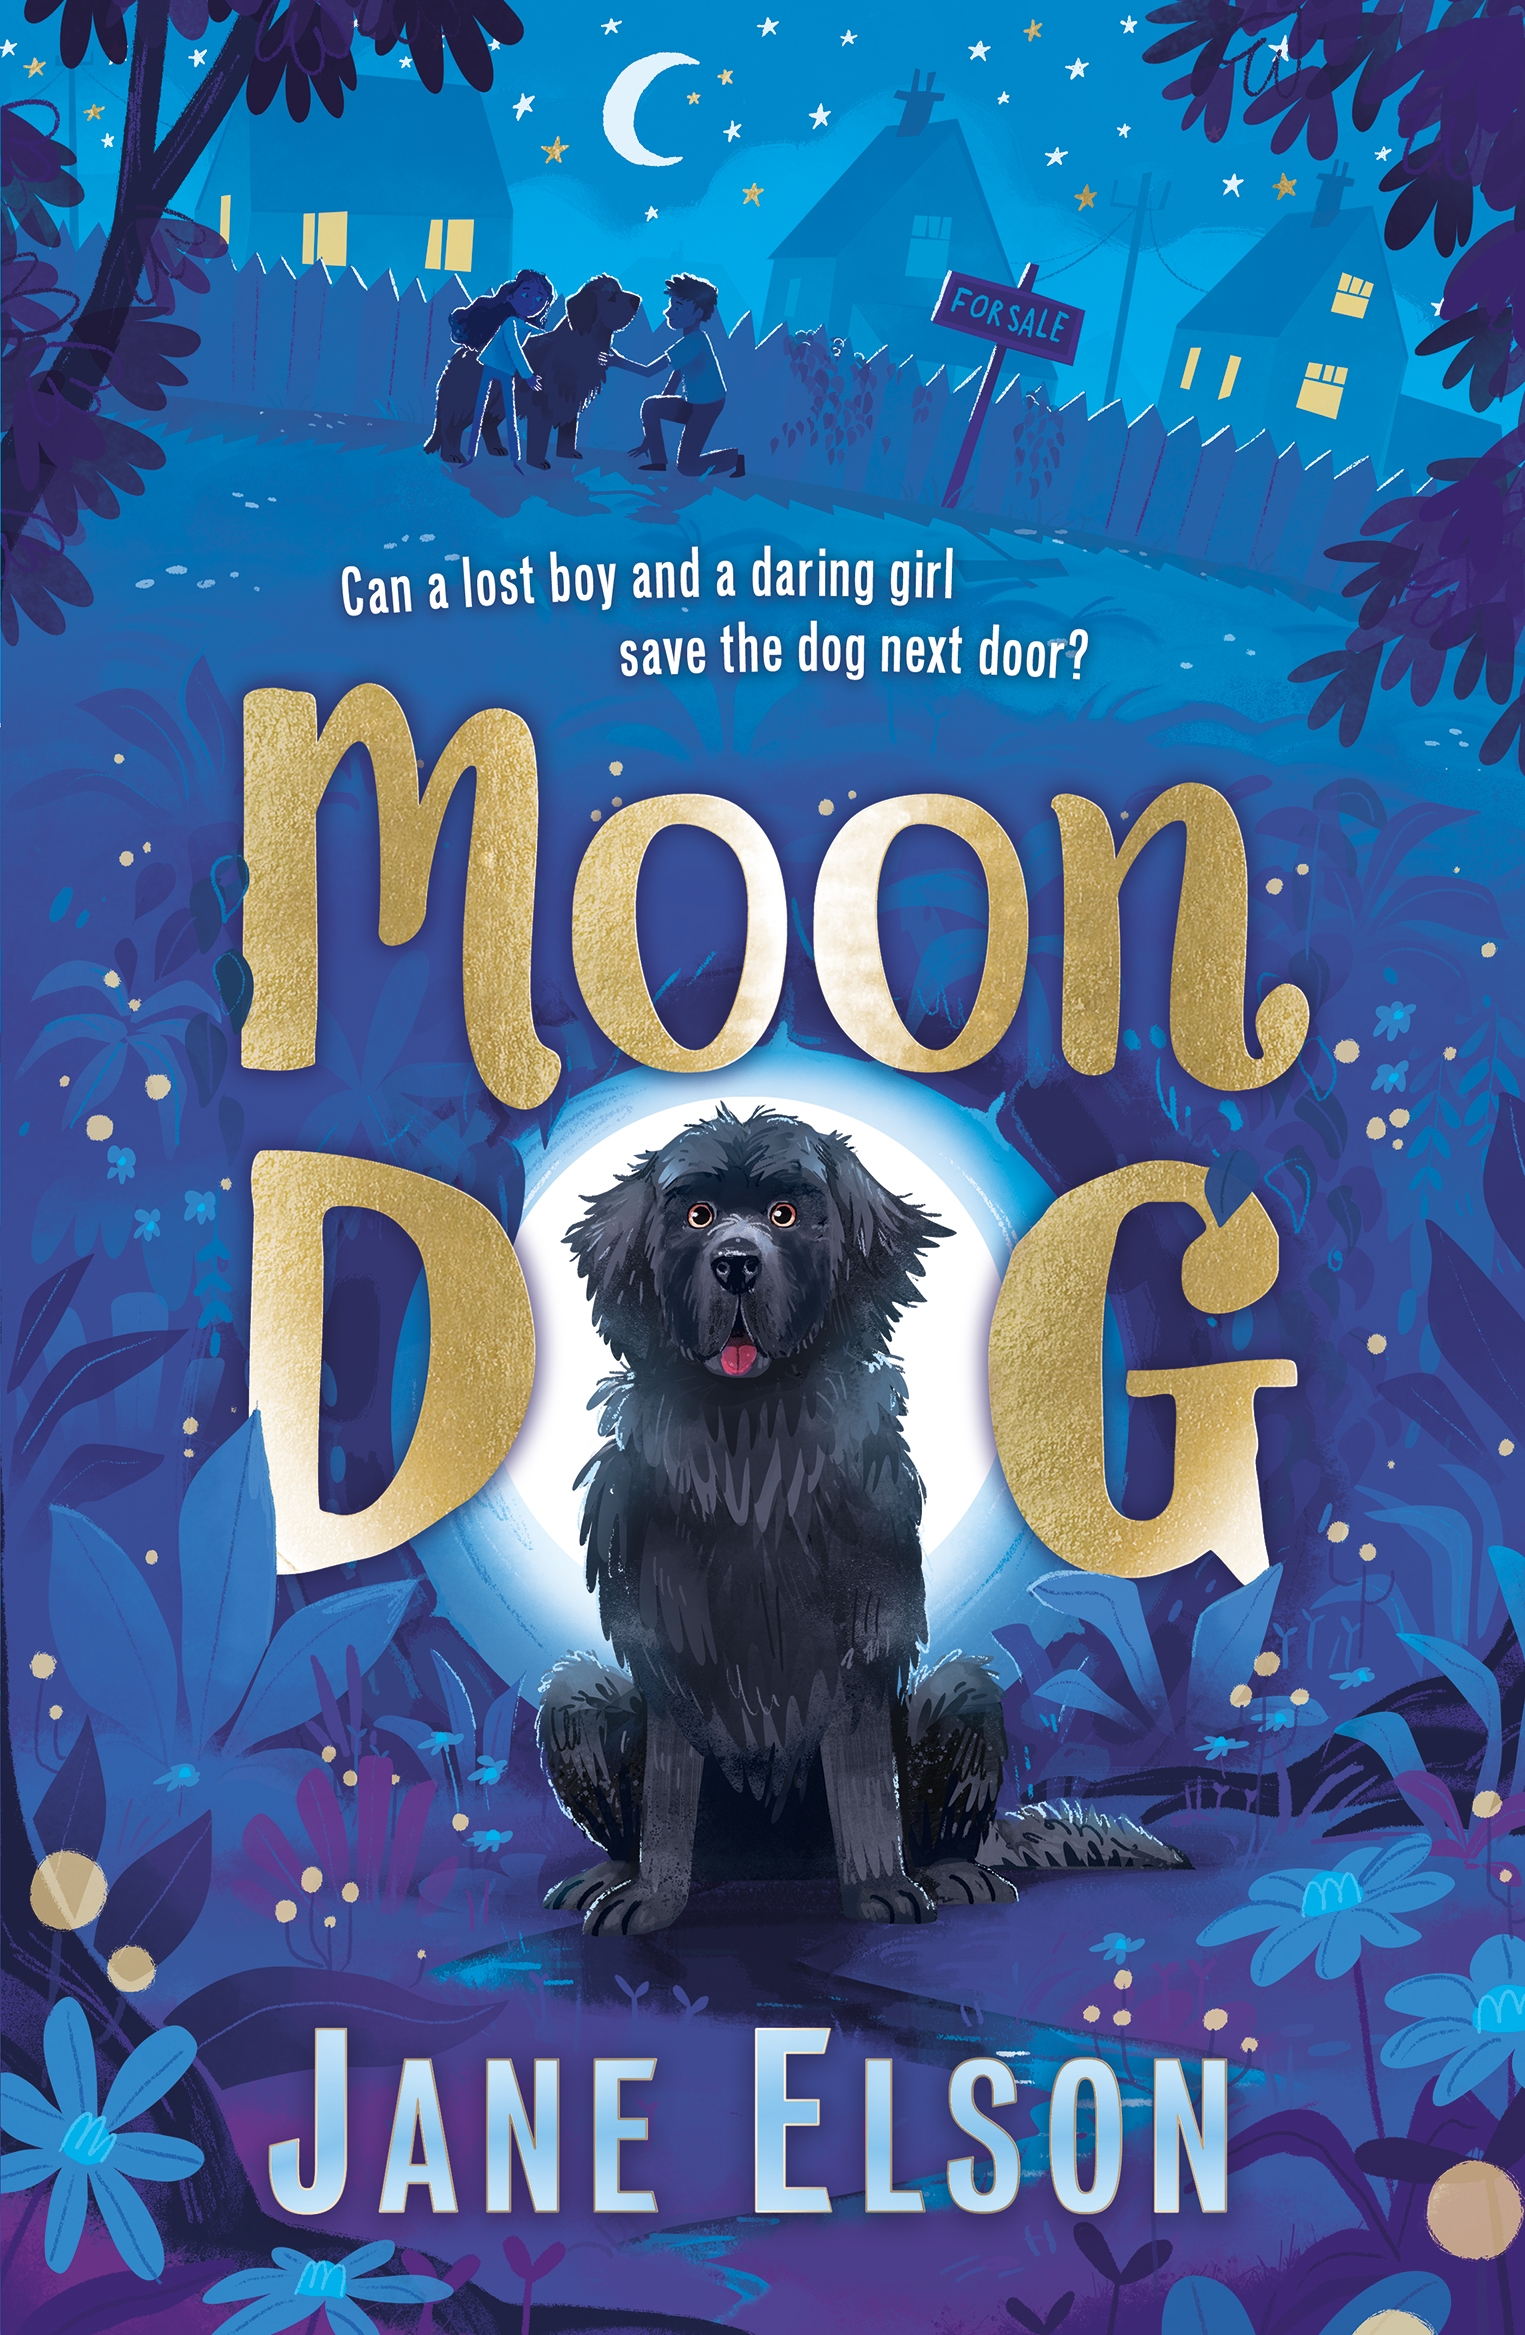 Launching Moon Dog virtually into the world – The Federation of Children's  Book Groups